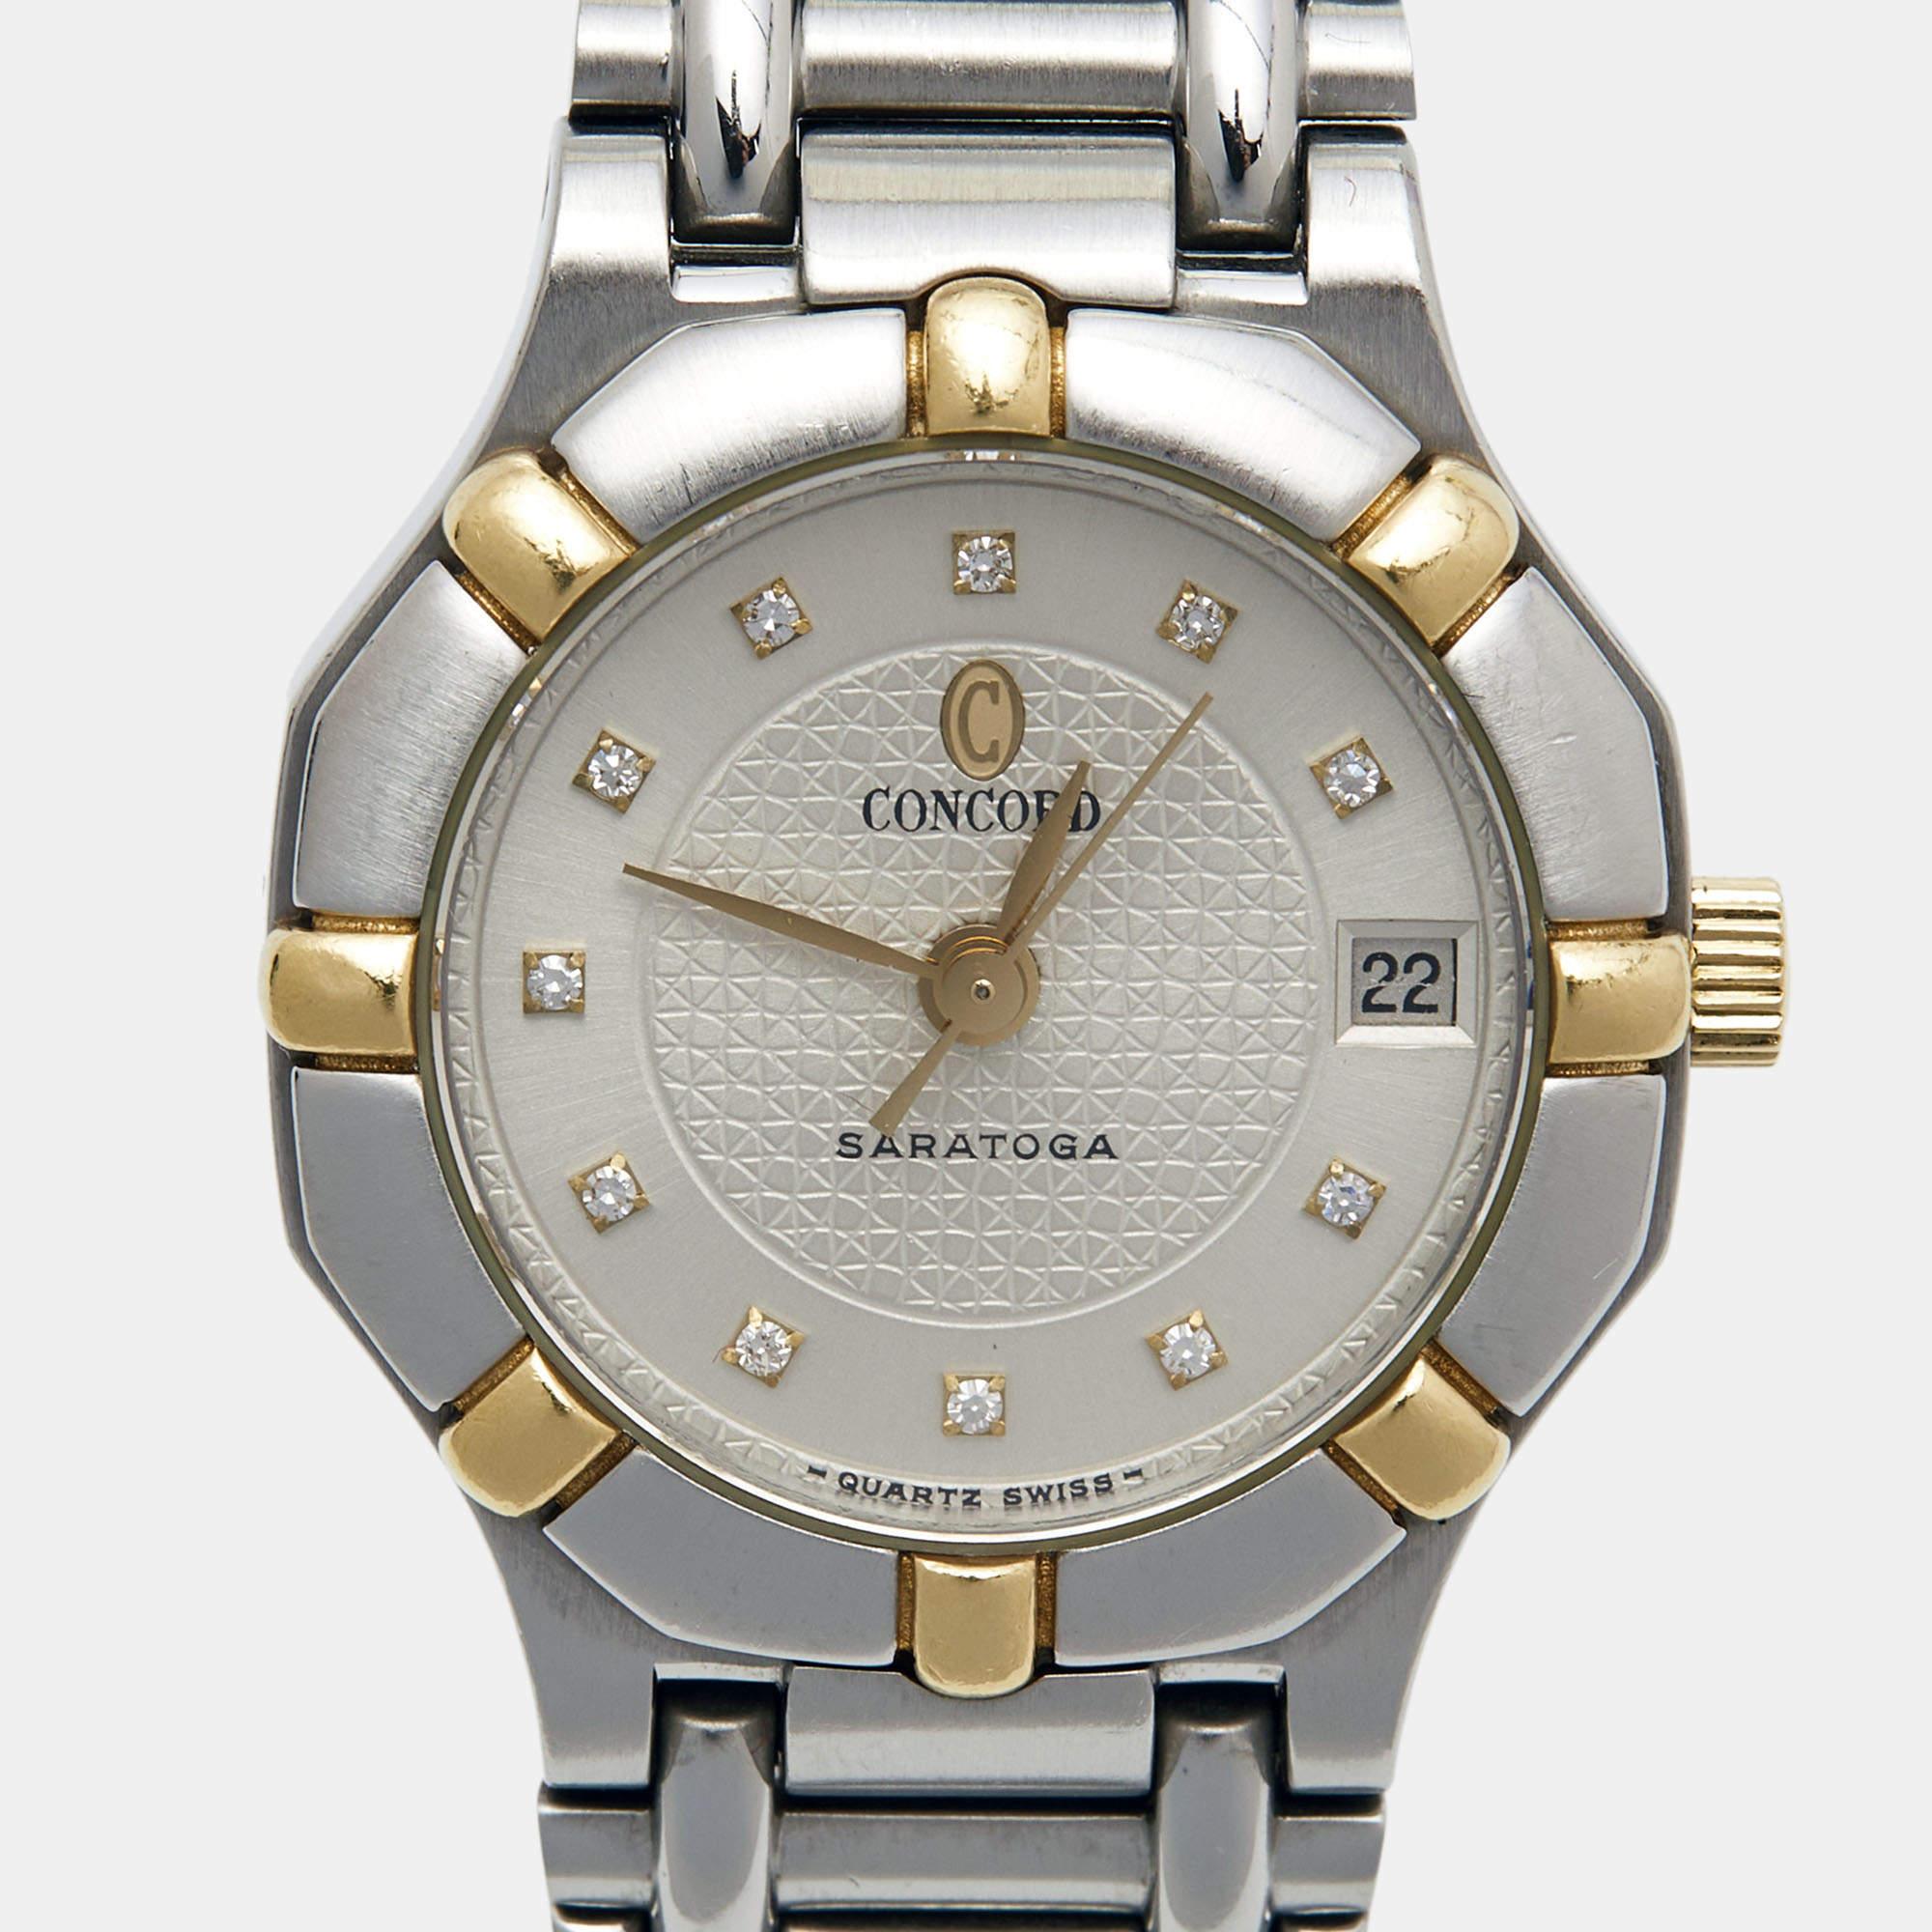 The charm of a finely crafted wristwatch accompanies the wearer through the years and to any occasion they have a date for. It is this charm, infused with timeless luxury, that makes this Concord wristwatch such an incredible pick.

